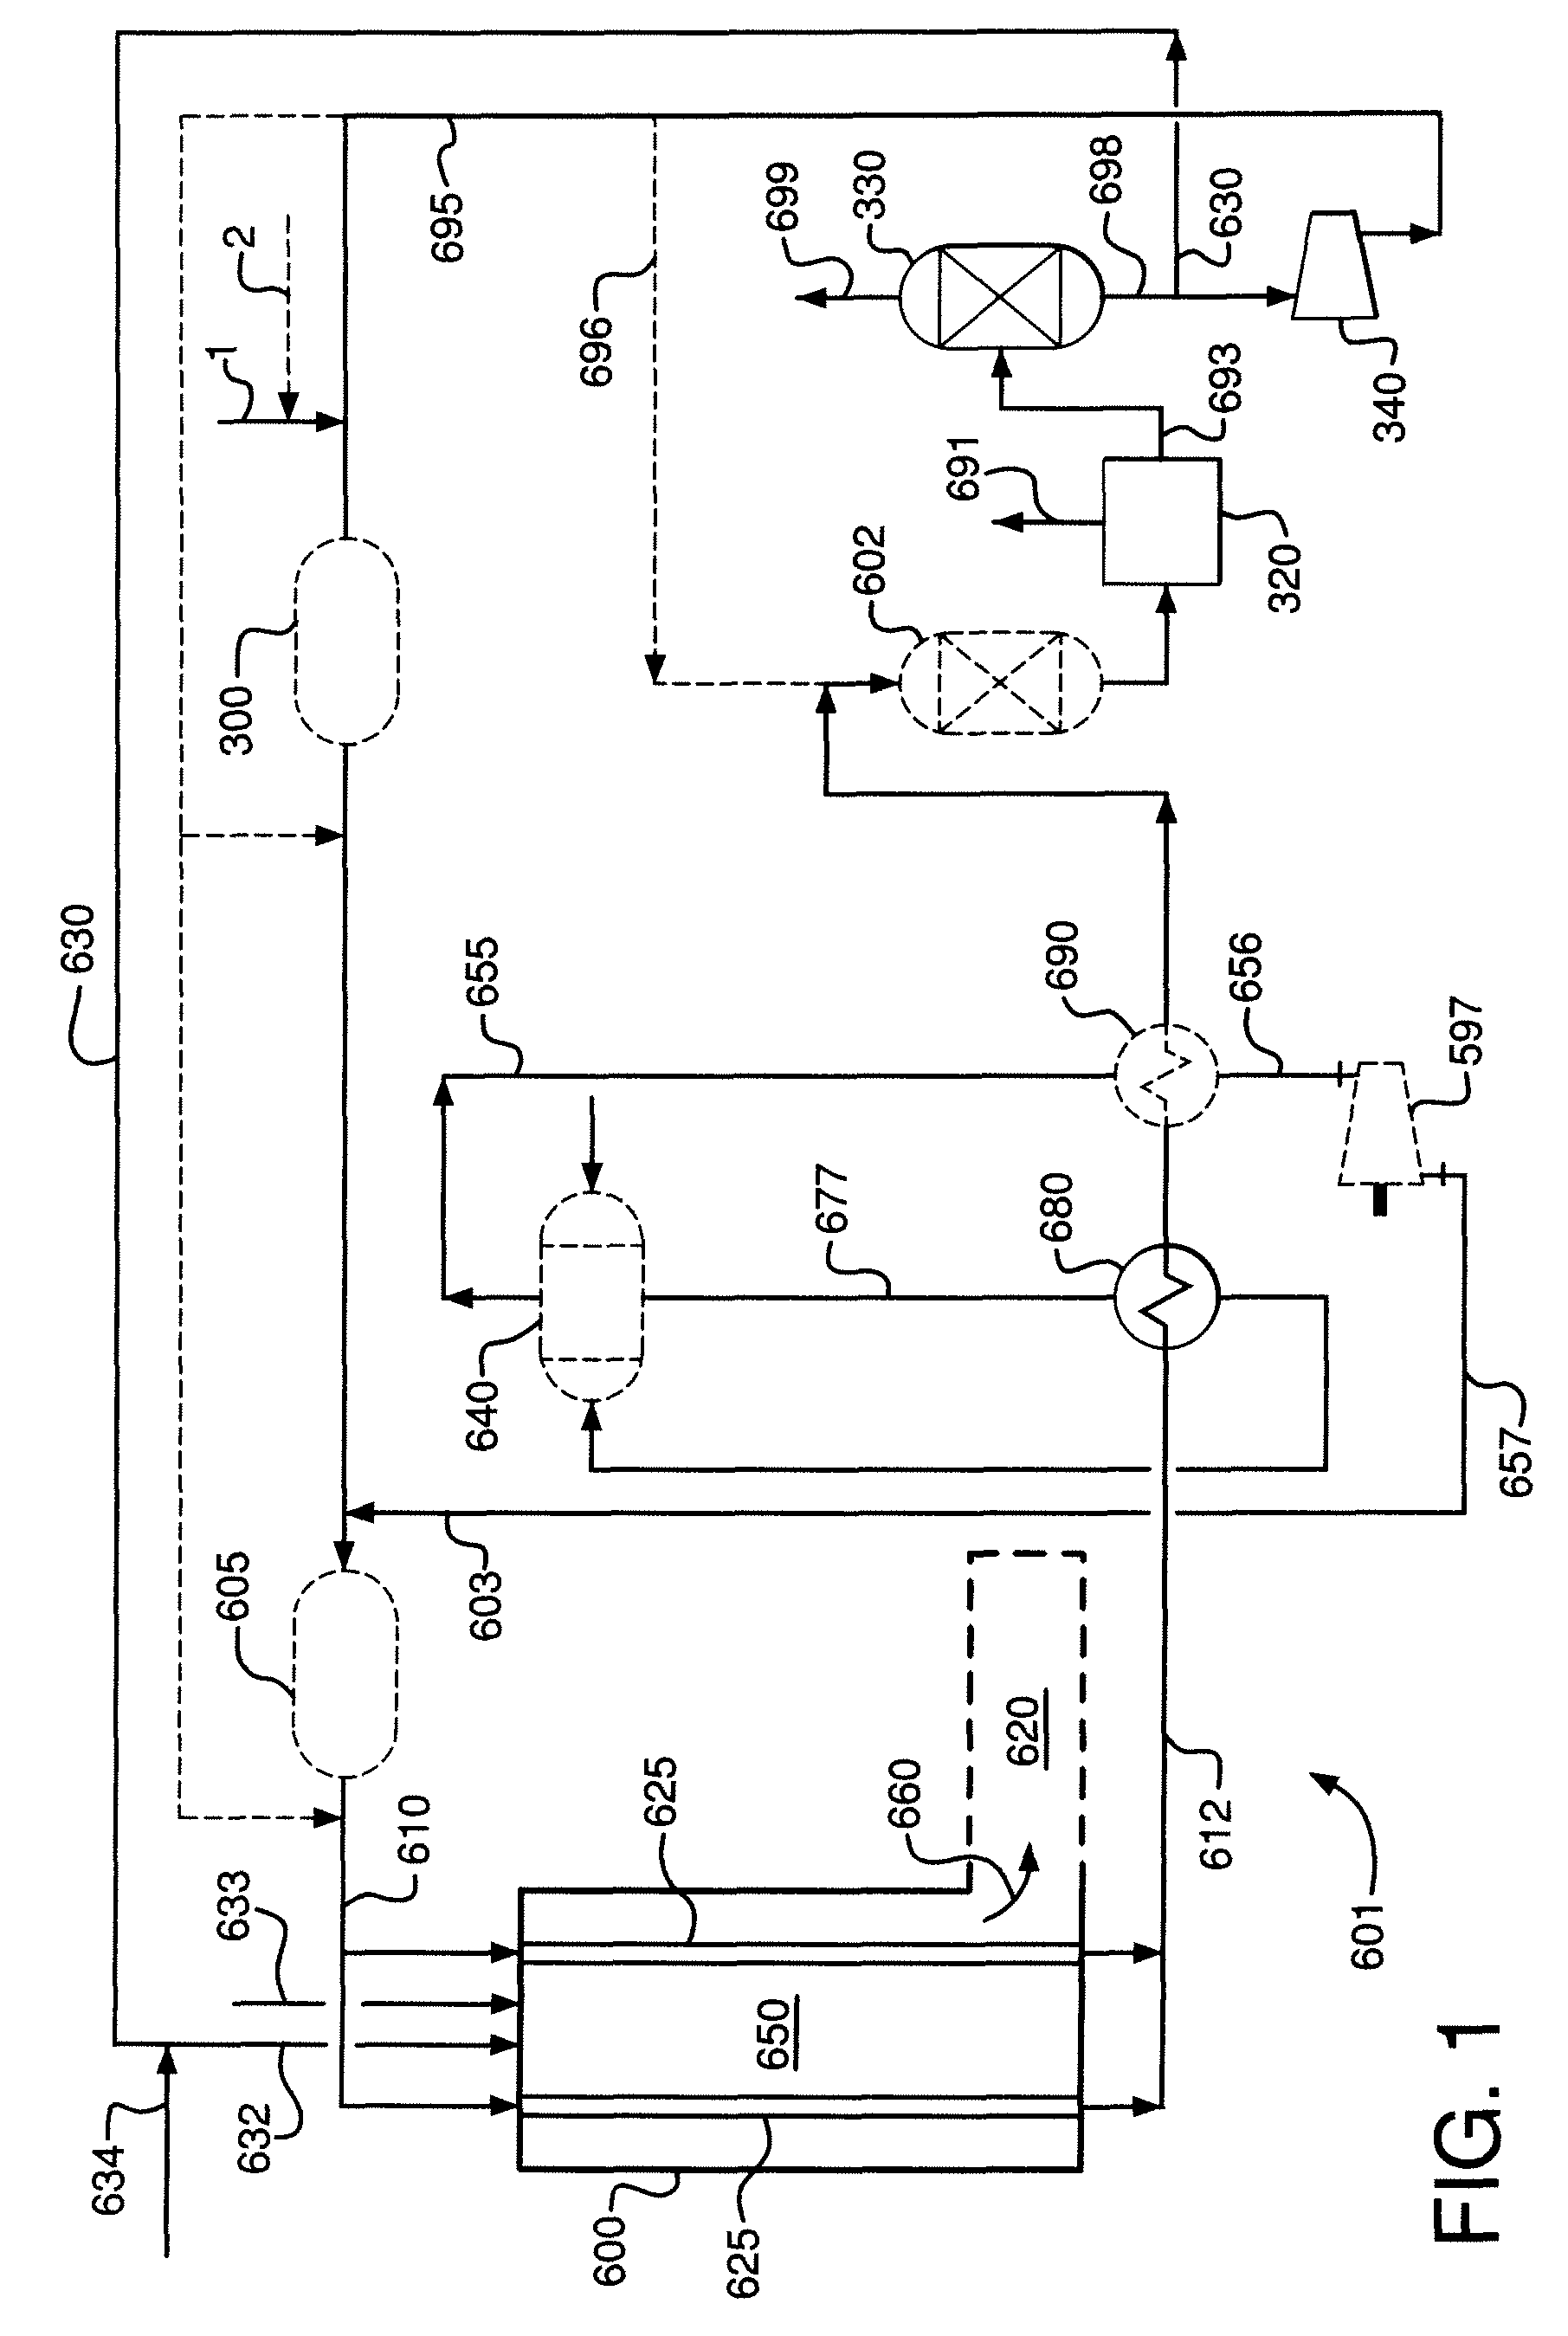 Steam-hydrocarbon reforming method with limited steam export